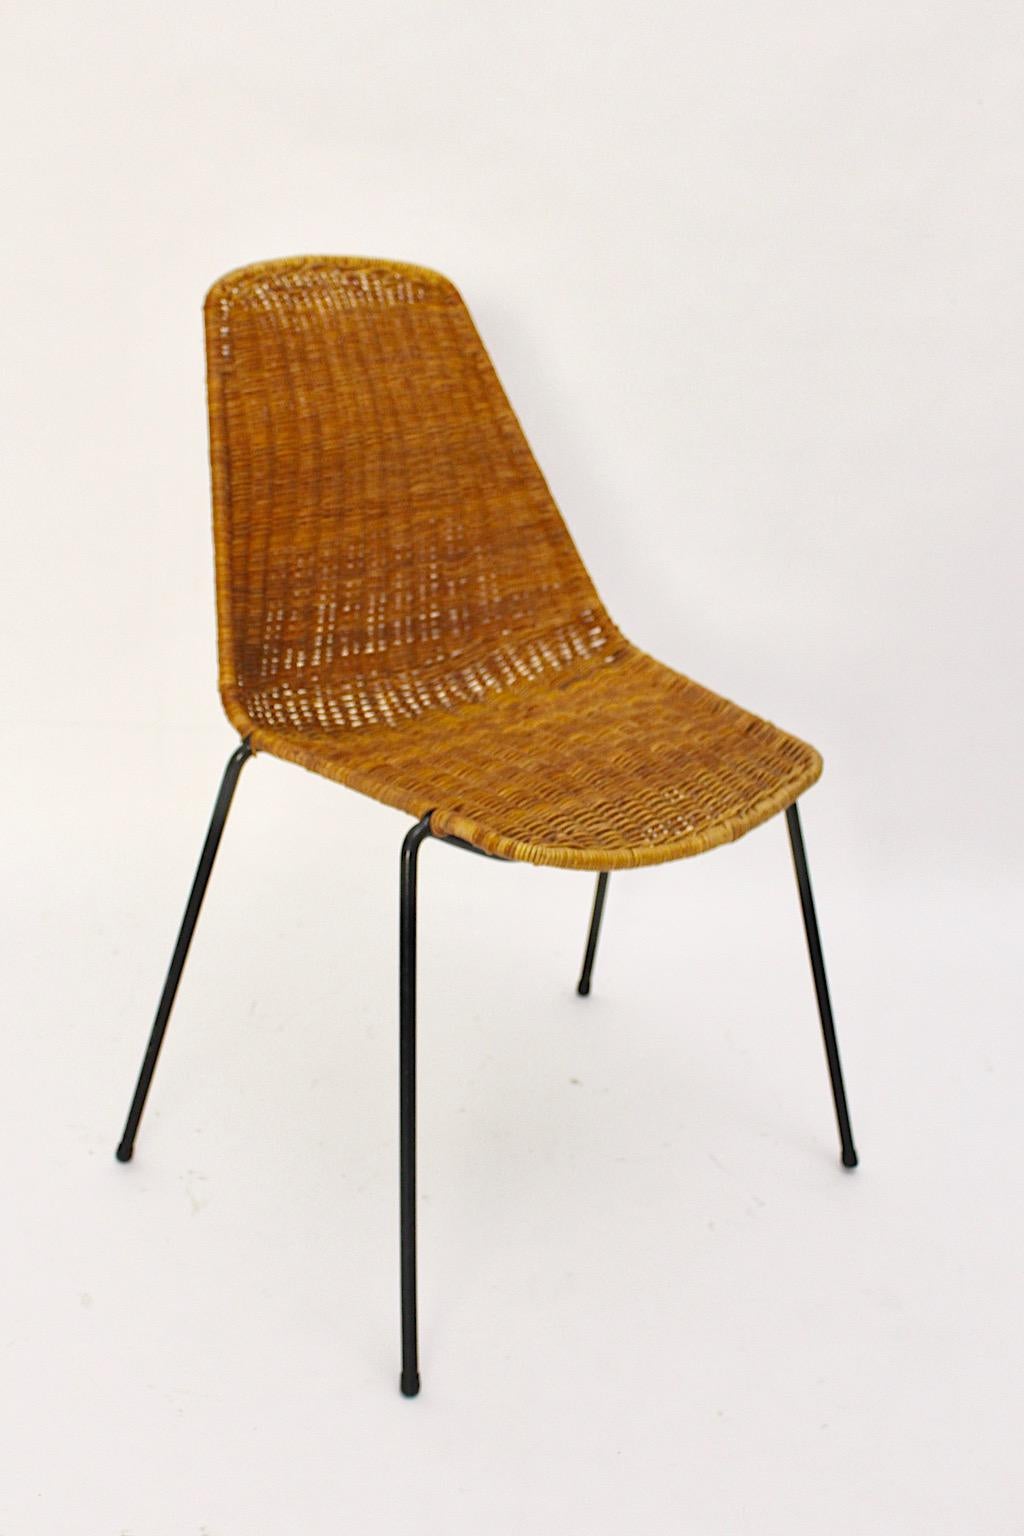 A Gian Franco Legler vintage rattan metal Mid-Century Modern chair or dining chair, which was designed 1951 Switzerland for the restaurant basket.
The rattan chair attributes a black lacquered metal frame and a handwoven rattan seat shell. The